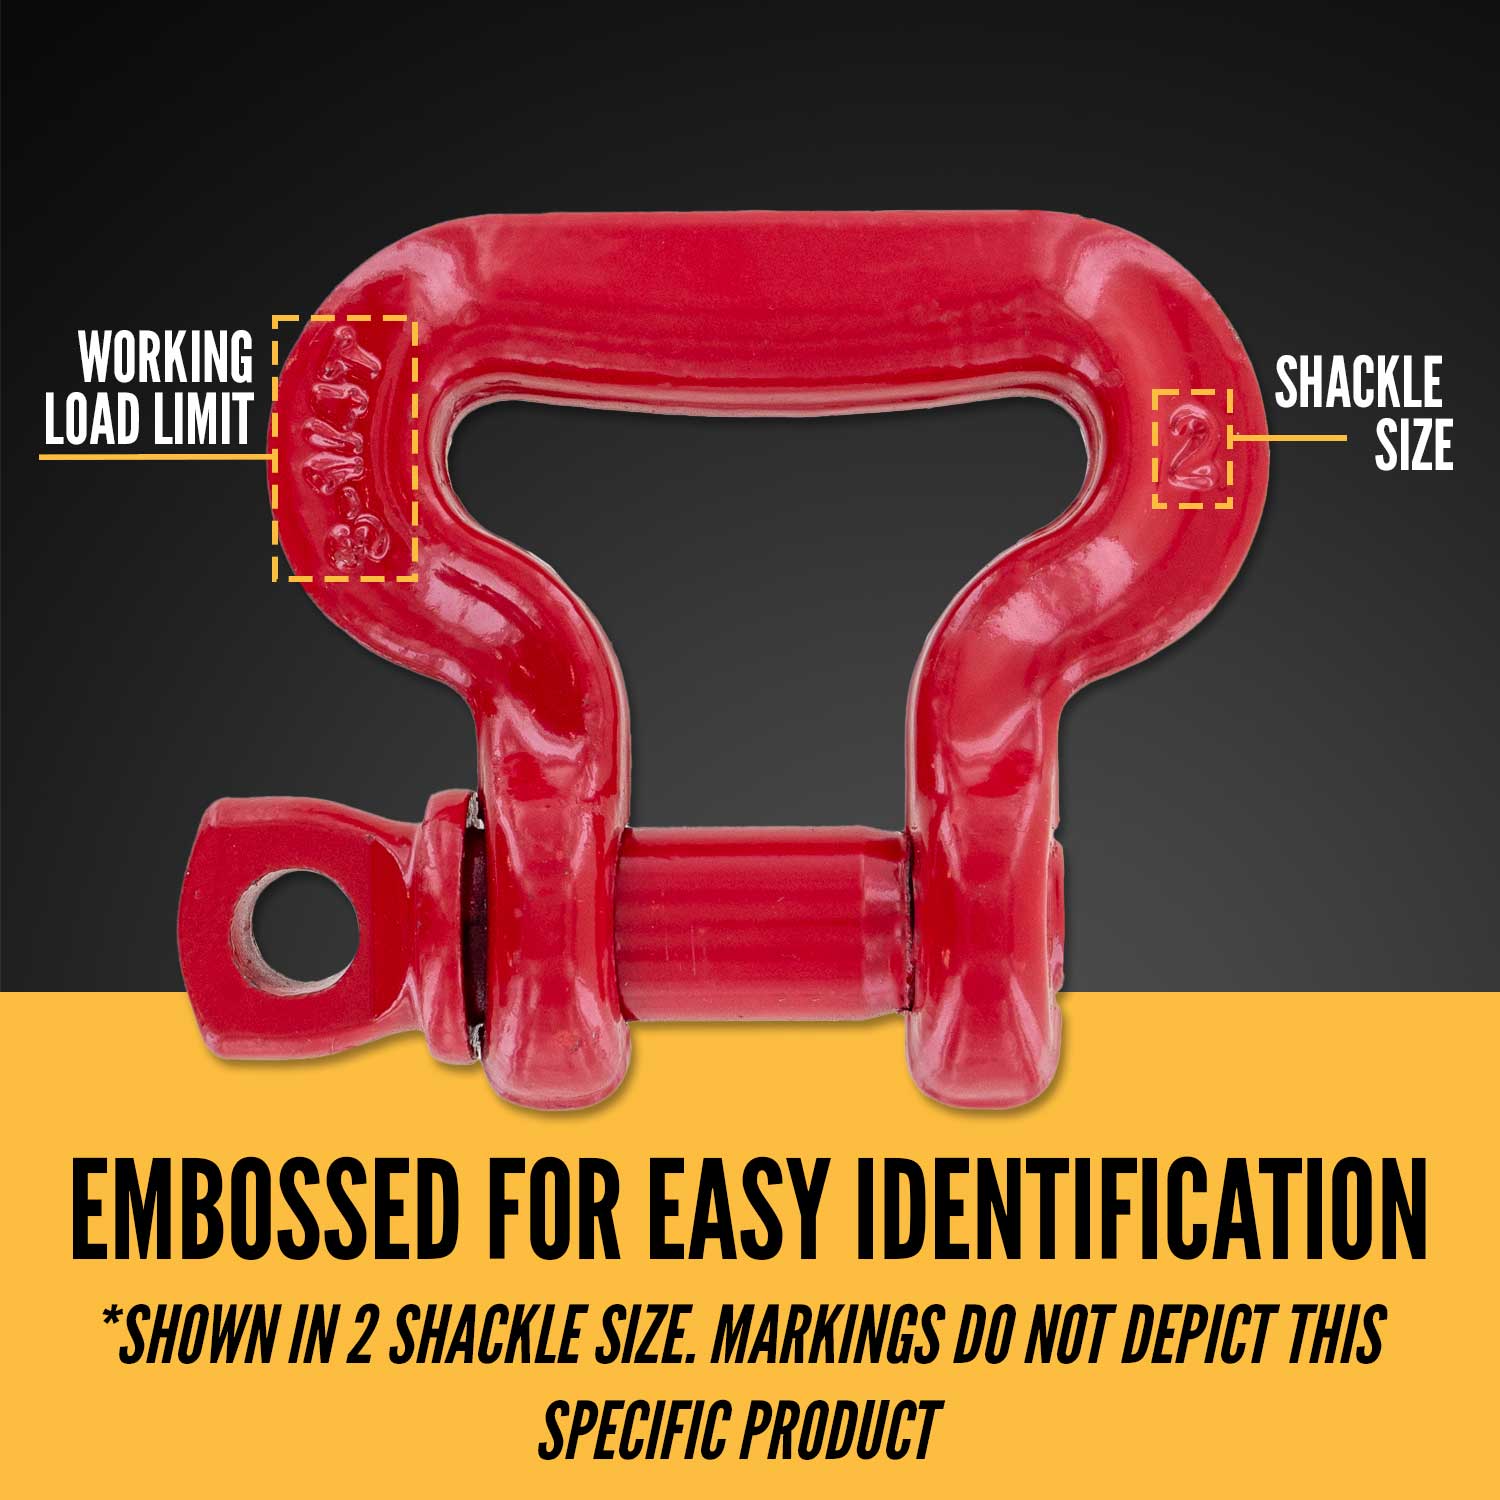 Crosby® Screw Pin Sling Saver Shackle | S-281 - 8.5 Ton embossed for easy identification